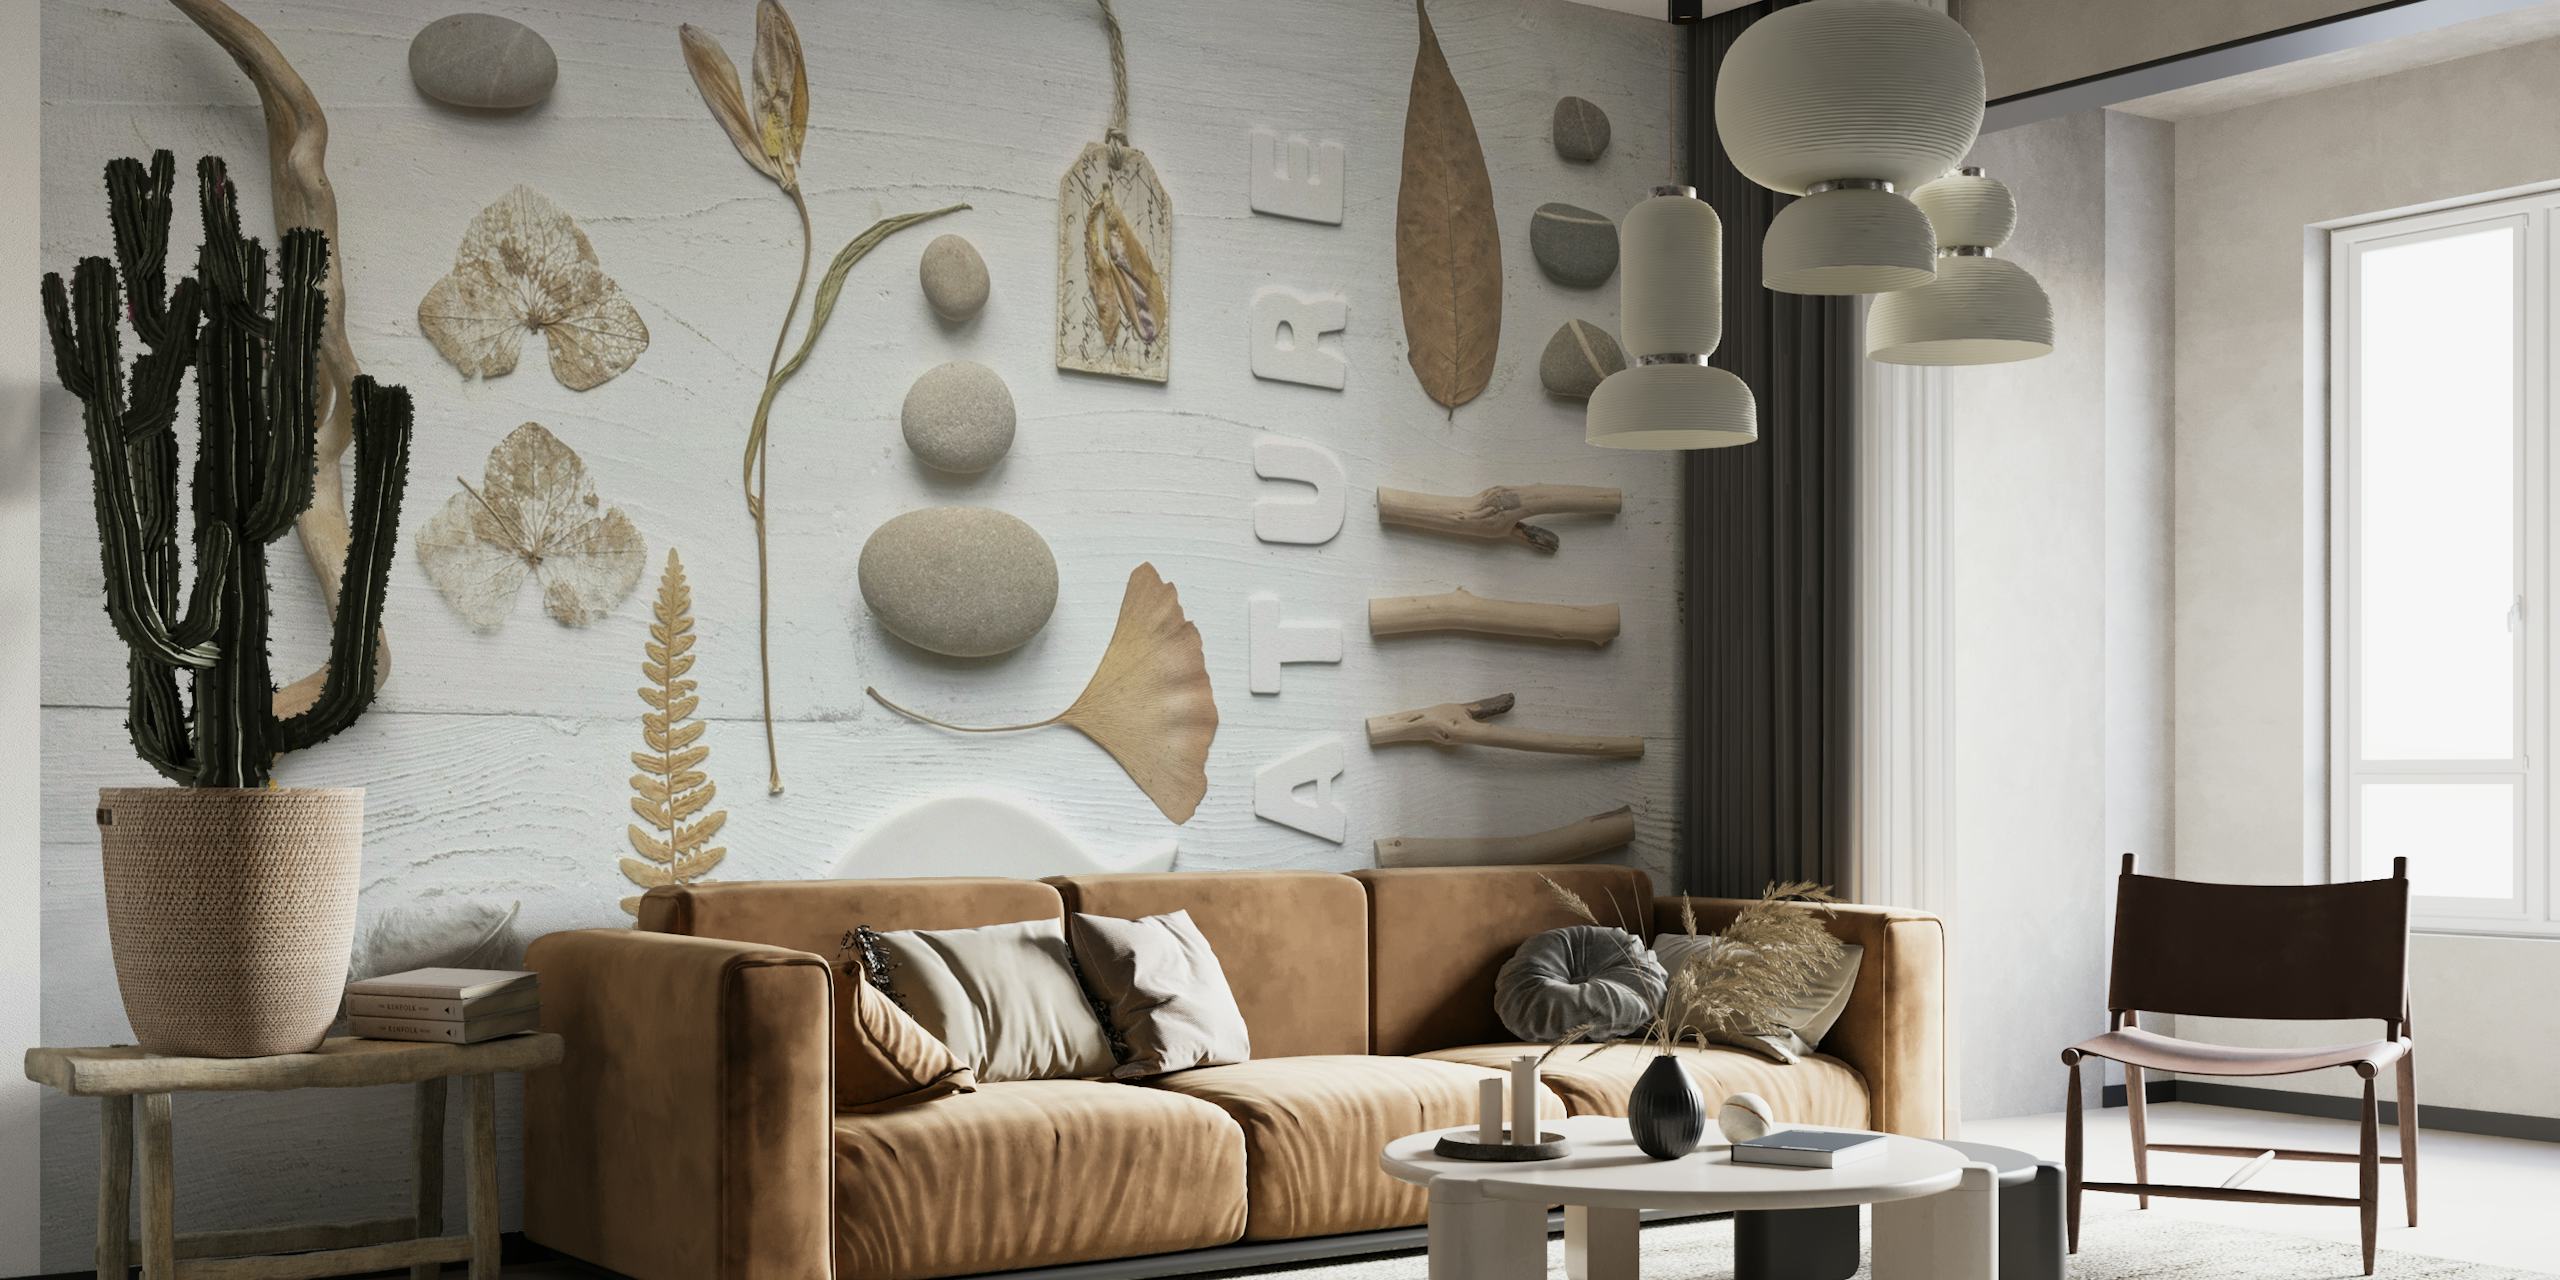 Nature collage wall mural featuring fish, stones, feathers, and botanical elements on a neutral background